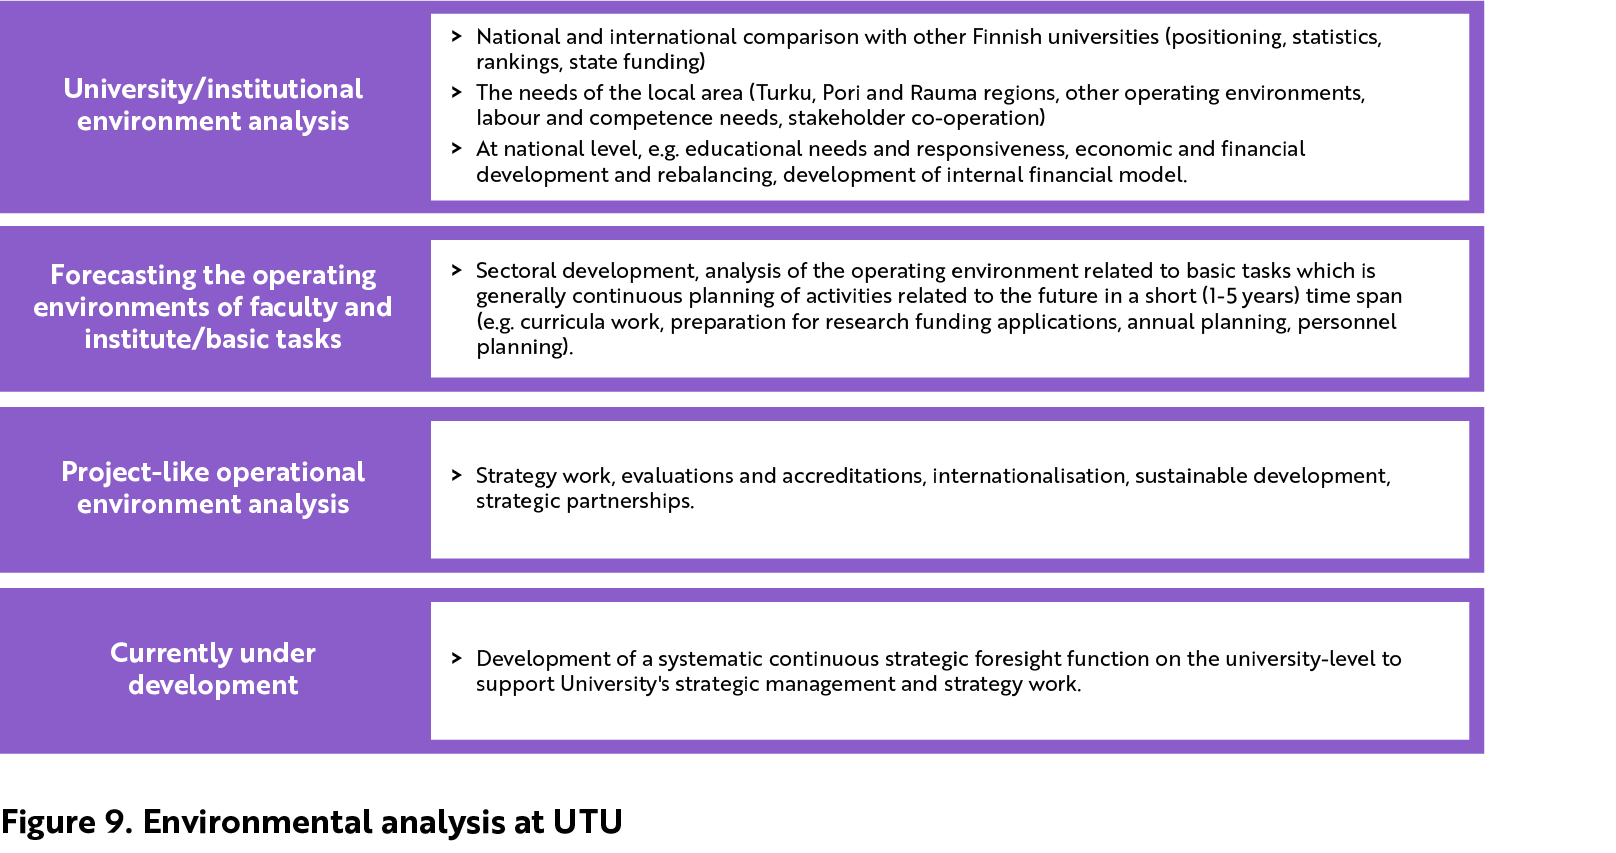 University/institutional environment analysis. National and international comparison with other Finnish universities on positioning, statistics, rankings and state funding. The needs of the local area, including Turku, Pori and Rauma regions, other operating environments, ¬labour and competence needs and stakeholder co-operation. At national level, for example, educational needs and responsiveness, economic and financial development and rebal¬ancing and development of internal financial model. Forecasting the operating environments of faculty and institute/basic tasks. Sectoral development, analysis of the operating environment rel¬ated to basic tasks which is generally continuous pl¬anning of activities related to the future in a short 1-5 years time span, e.g. curricul¬a work, preparation for research funding applications, annual p¬lanning and personnel p¬lanning. Project-like operational environment analysis. Strategy work, evaluations and accreditations, internationalisation, sustainable development, strategic partnerships. Currently under development. Development of a systematic continuous strategic foresight function on the university-level to support University's strategic management and strategy work.